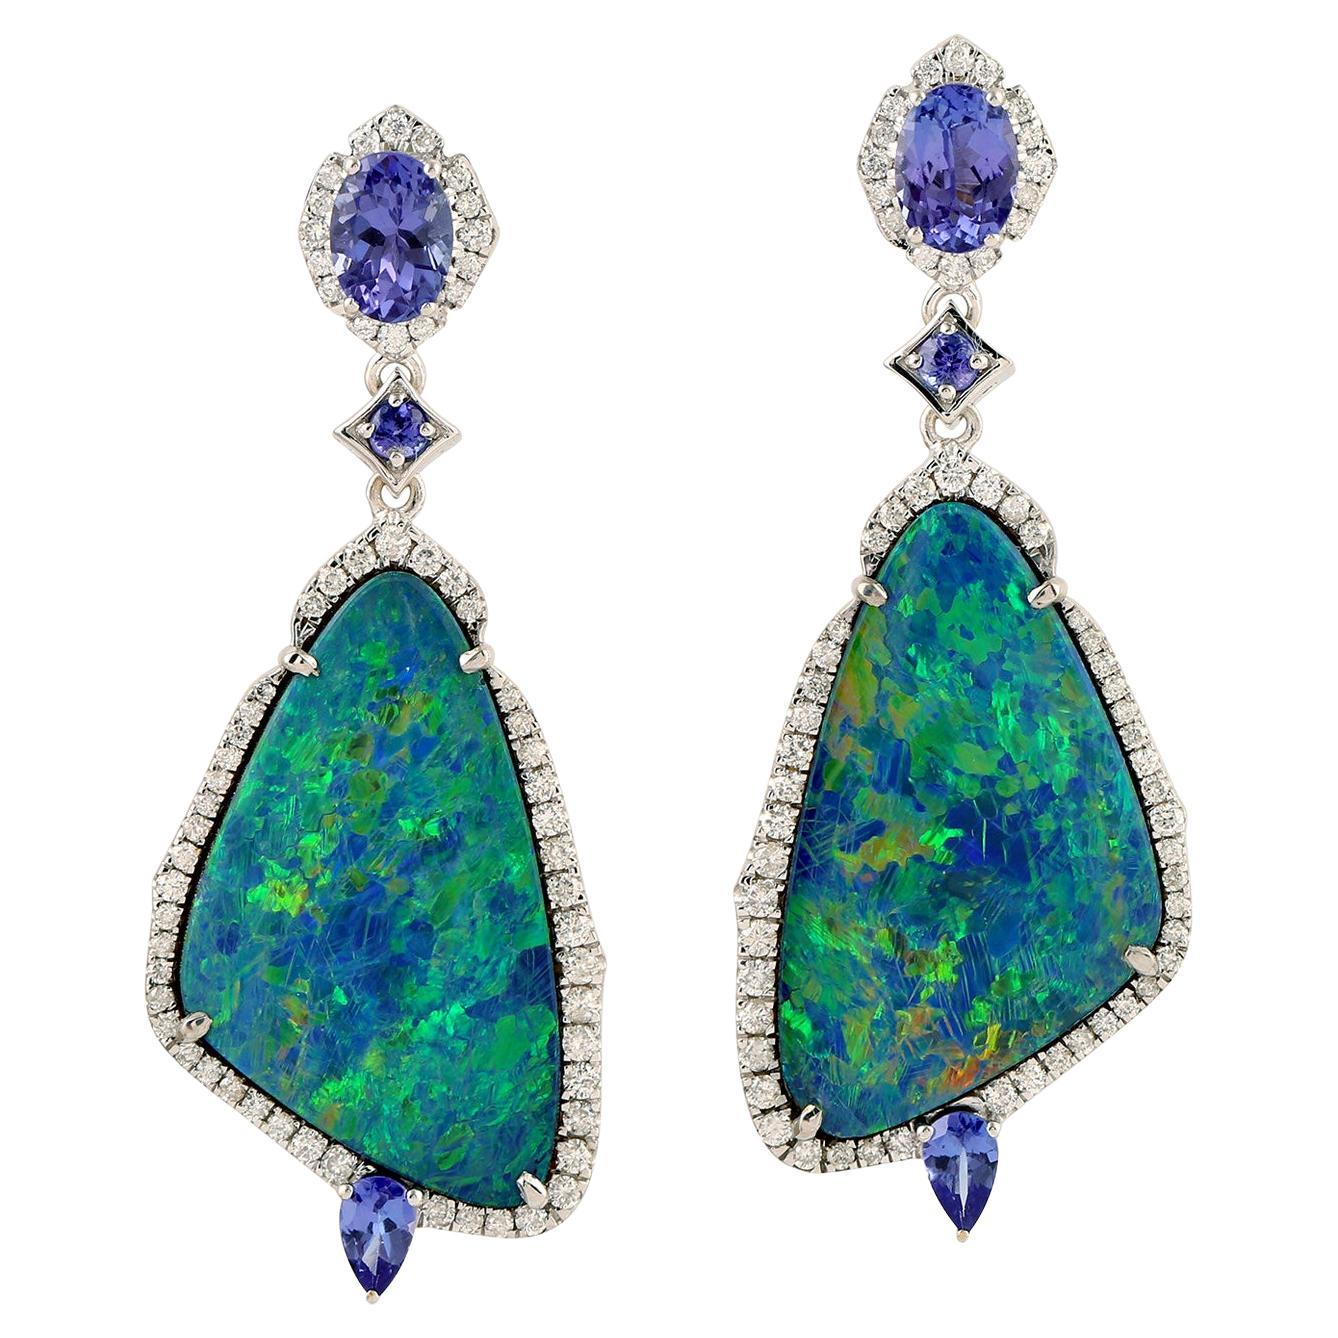 20.81ct Opal Dangle Earrings With Tanzanite & Diamonds Made In 18k White Gold For Sale